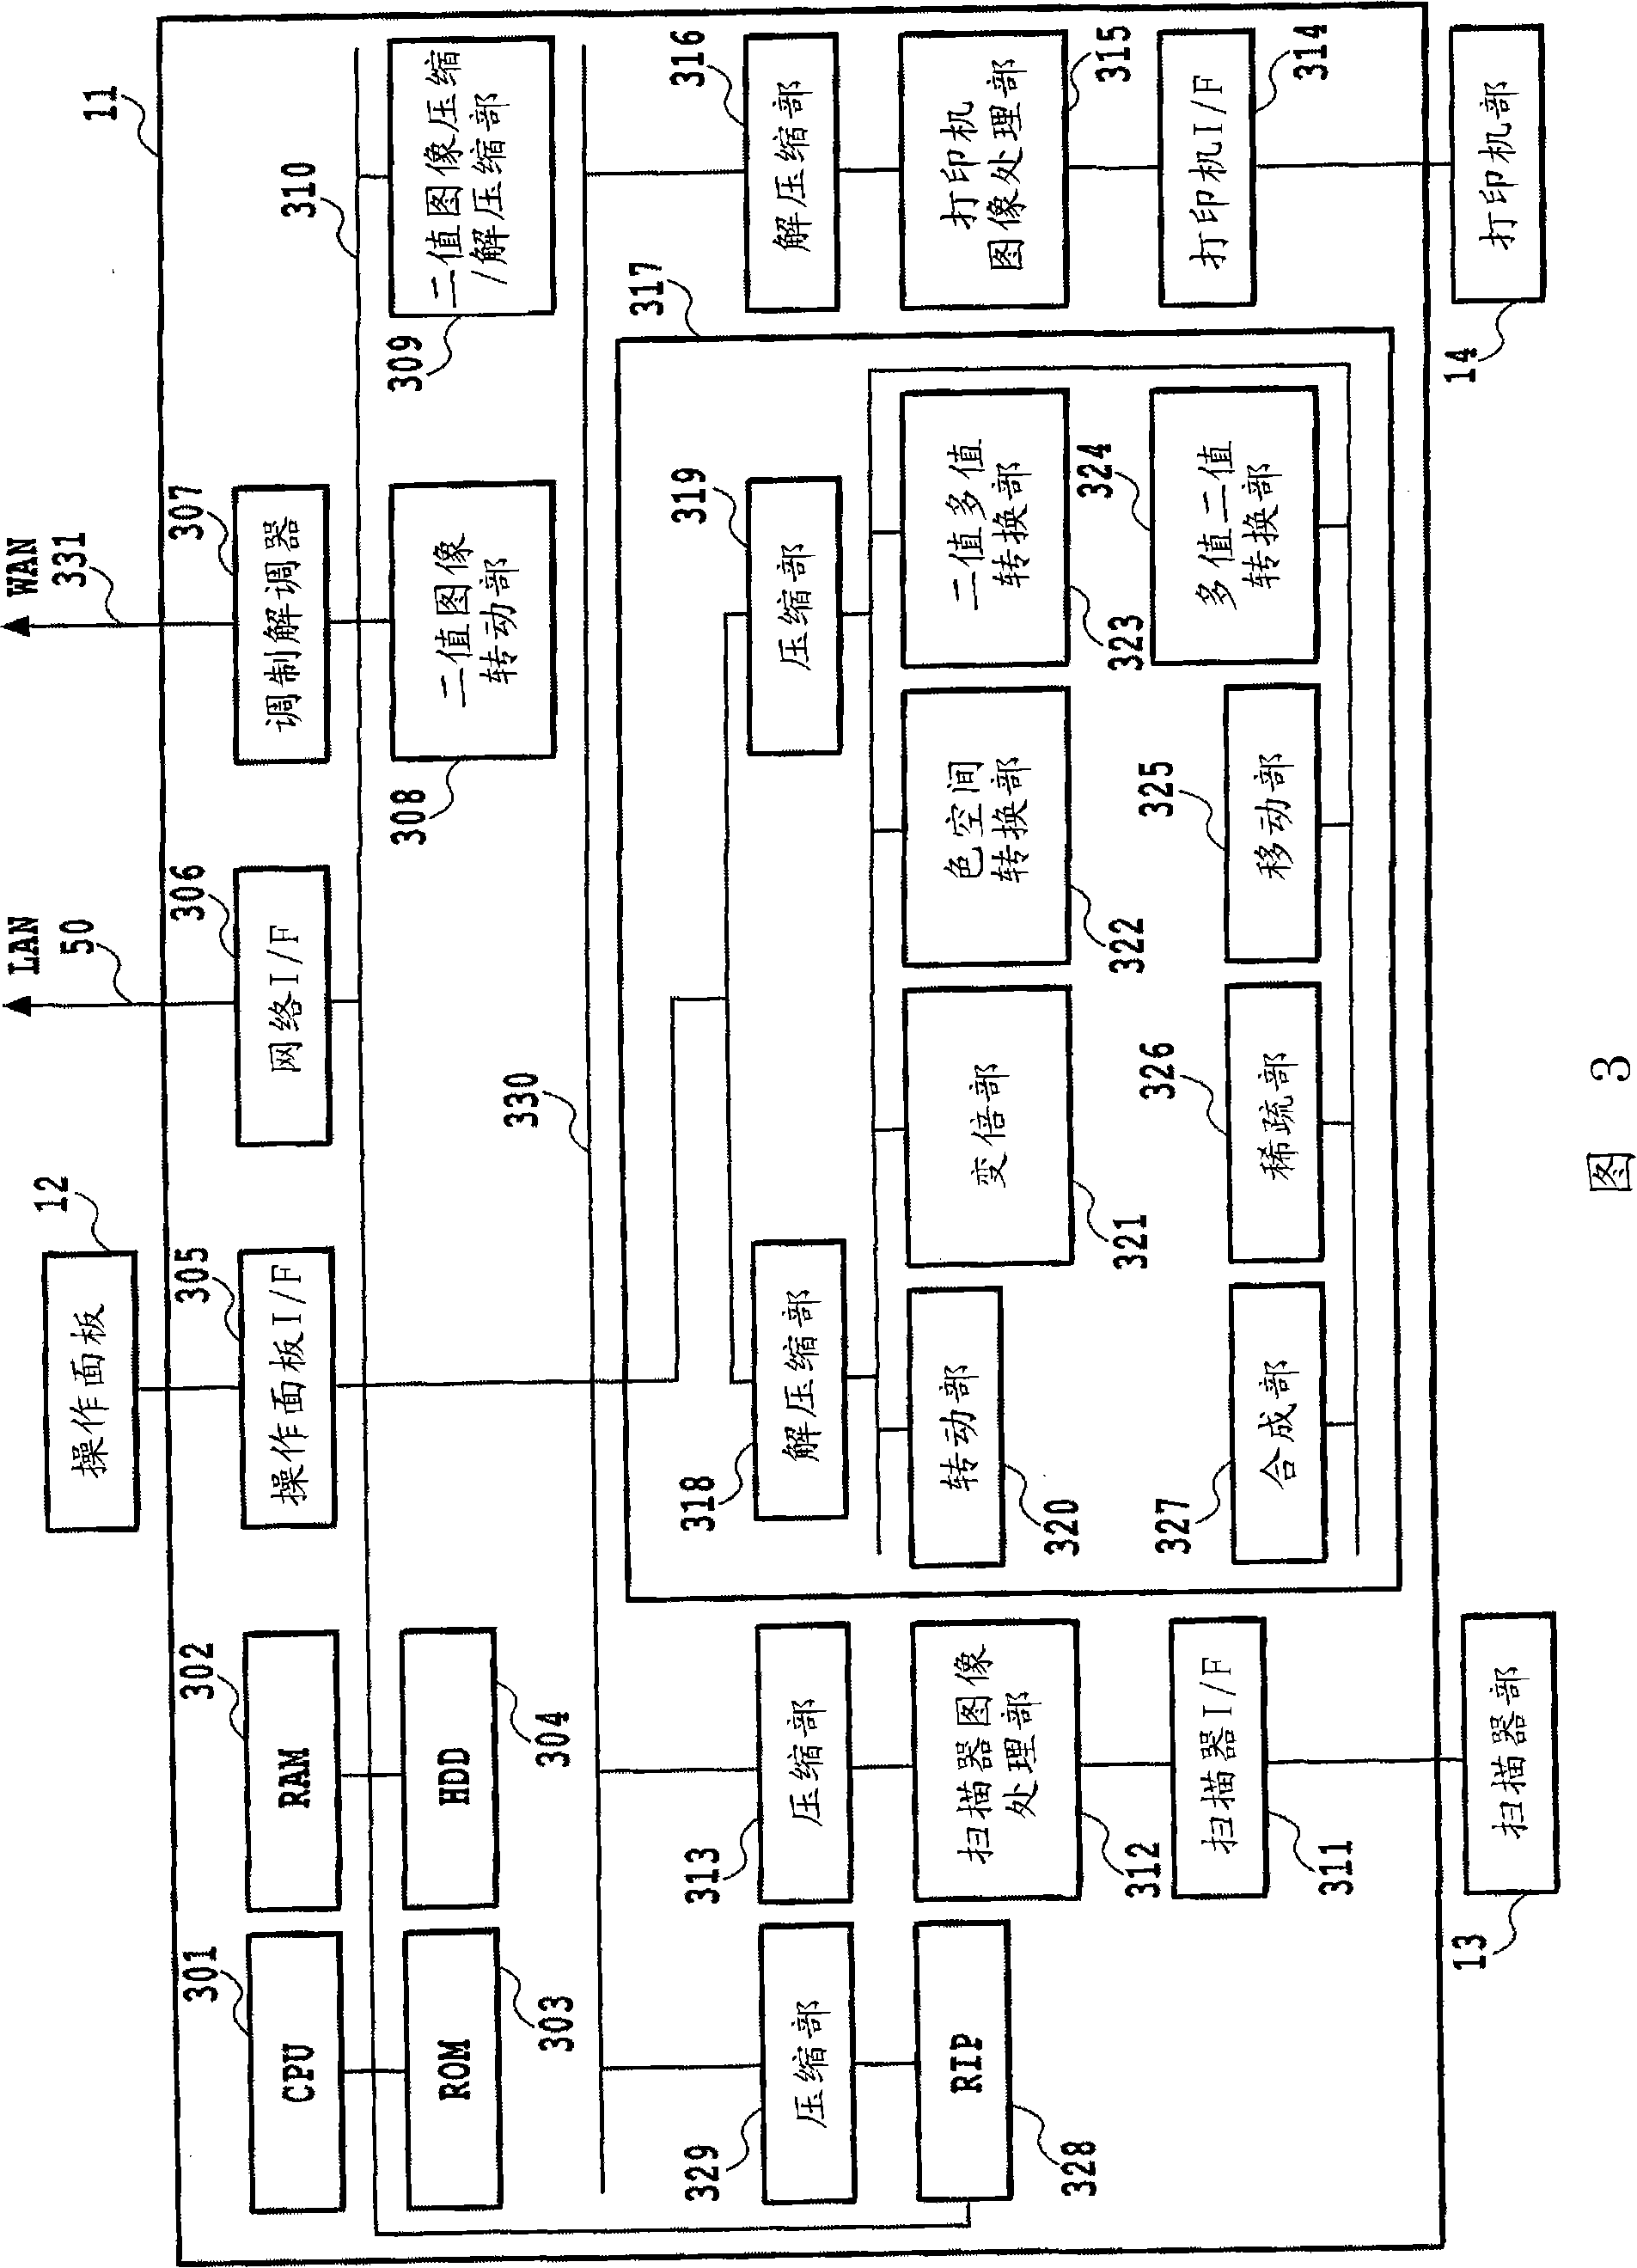 Image processing apparatus and method, program and readable memory medium for computer